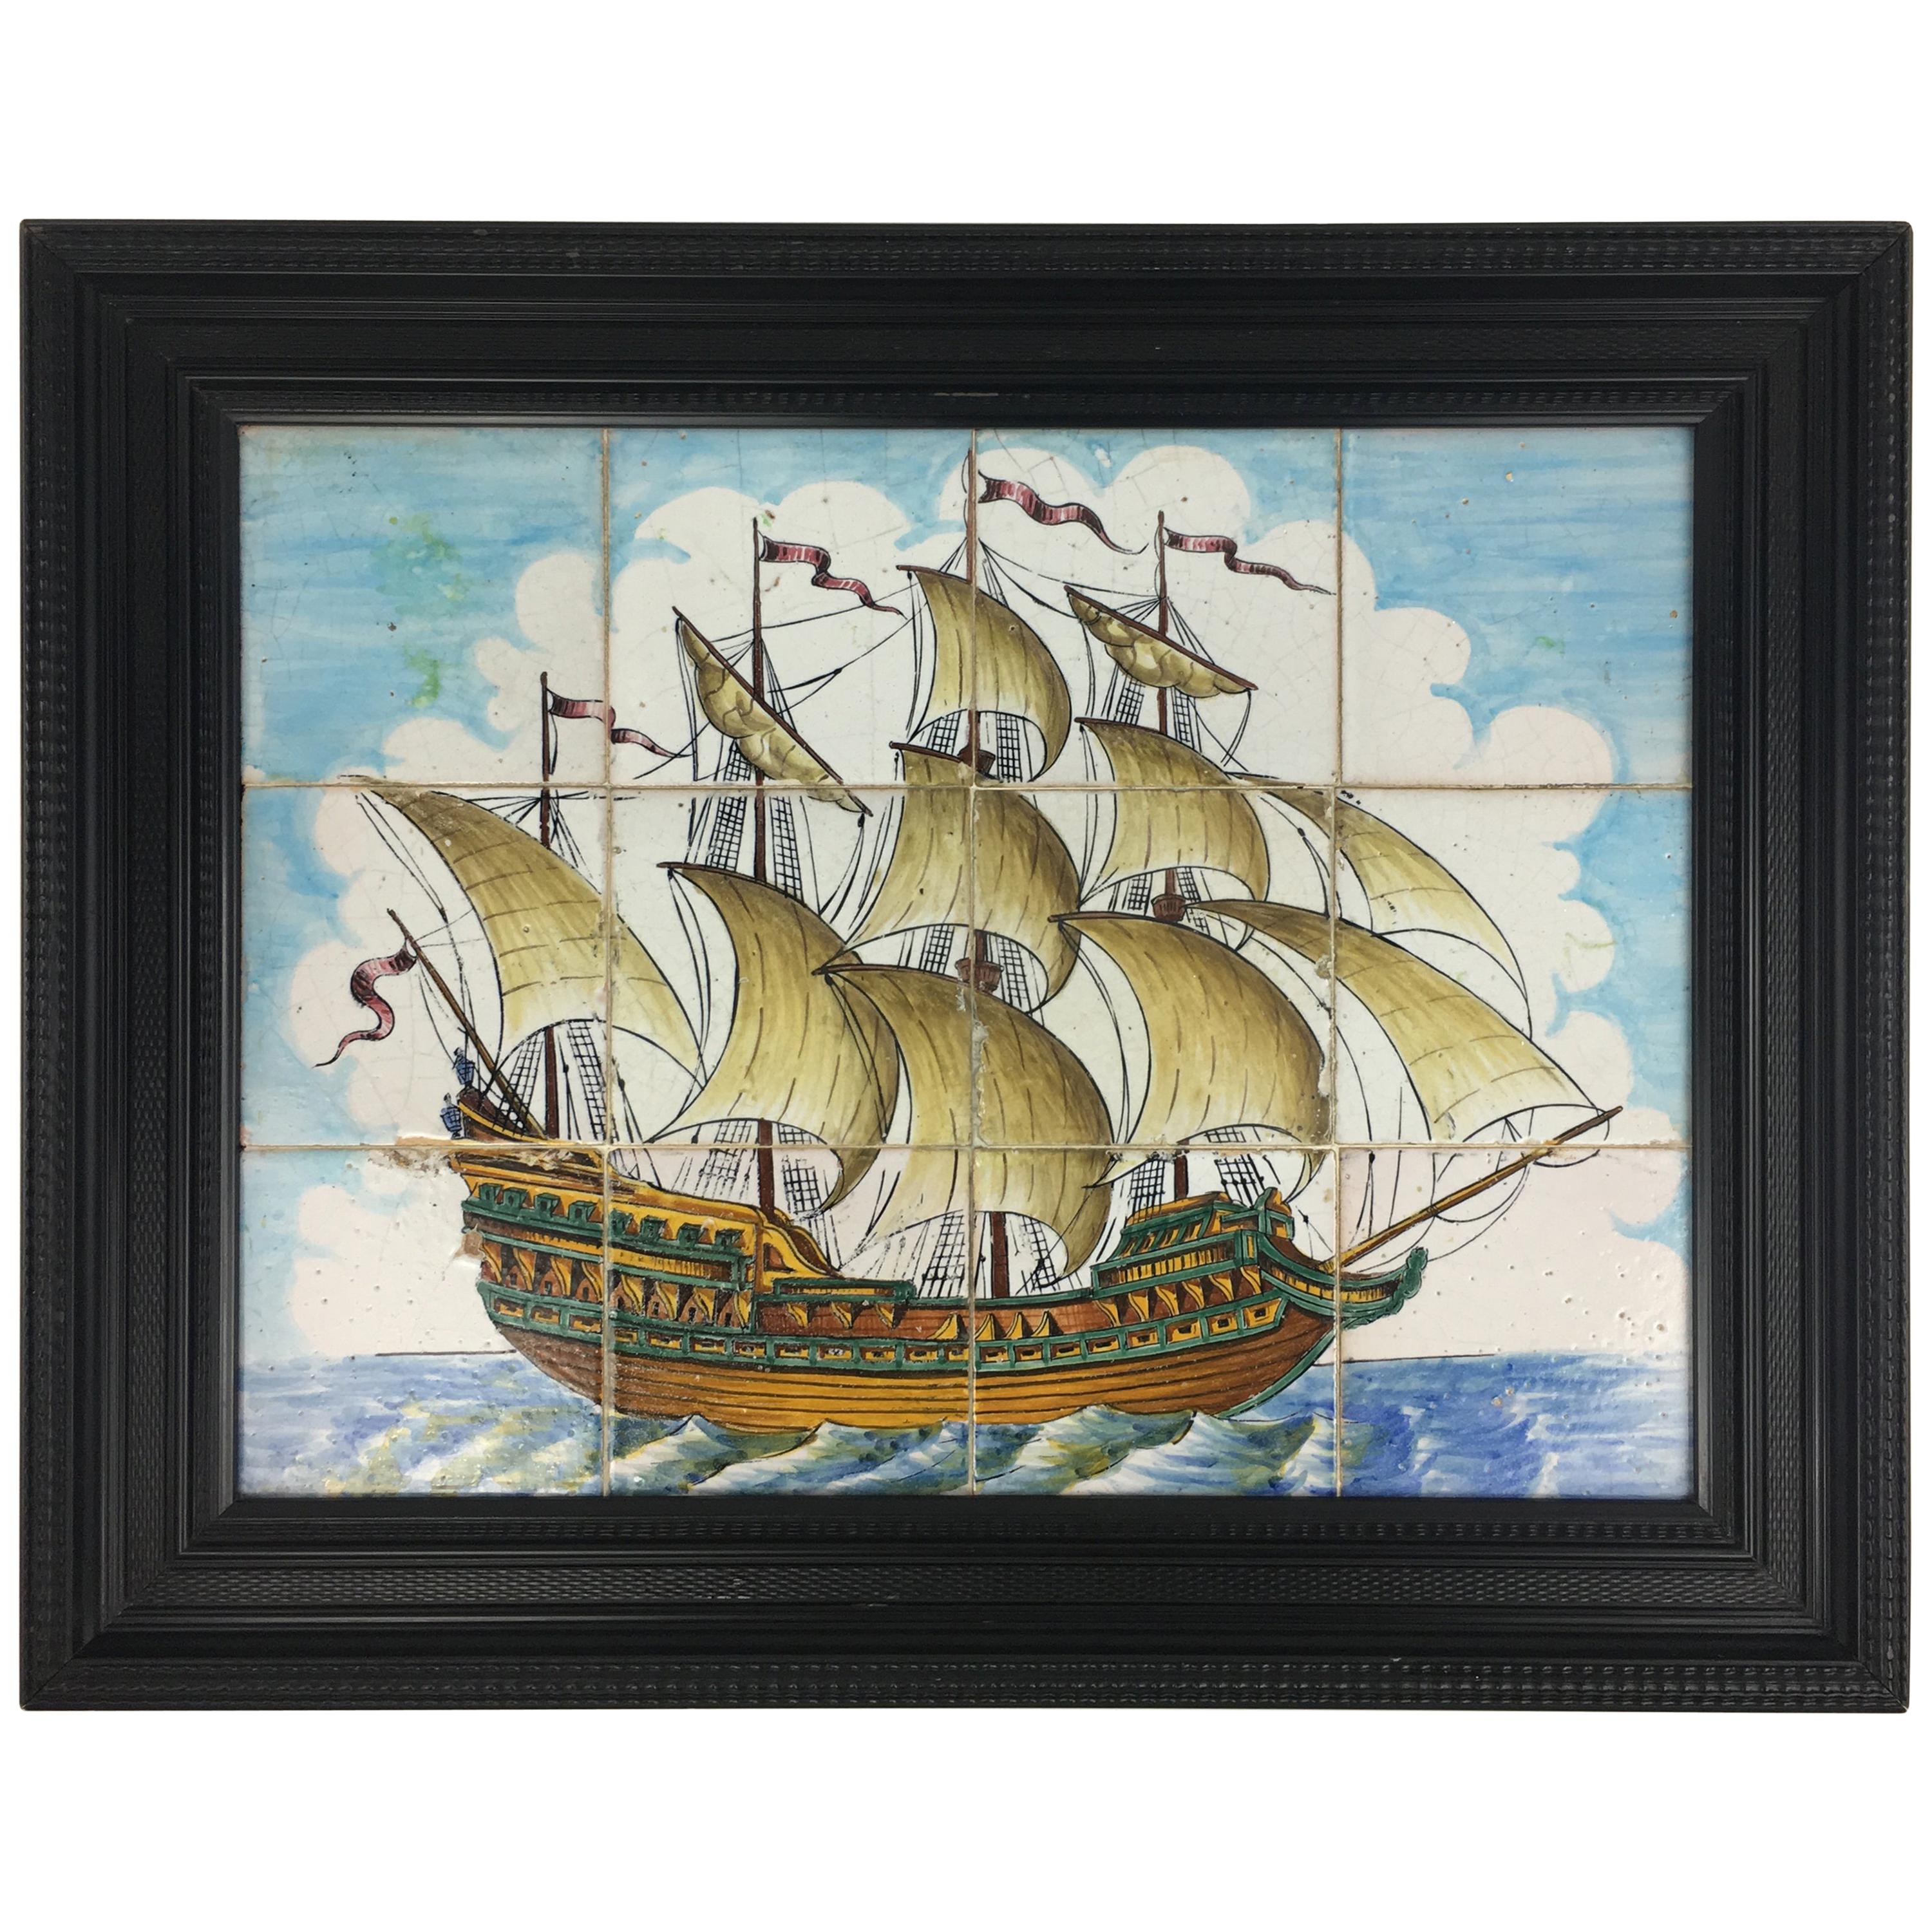 18th Century Portuguese Mural Tiles Wall Hanging with Sailboat on the Sea